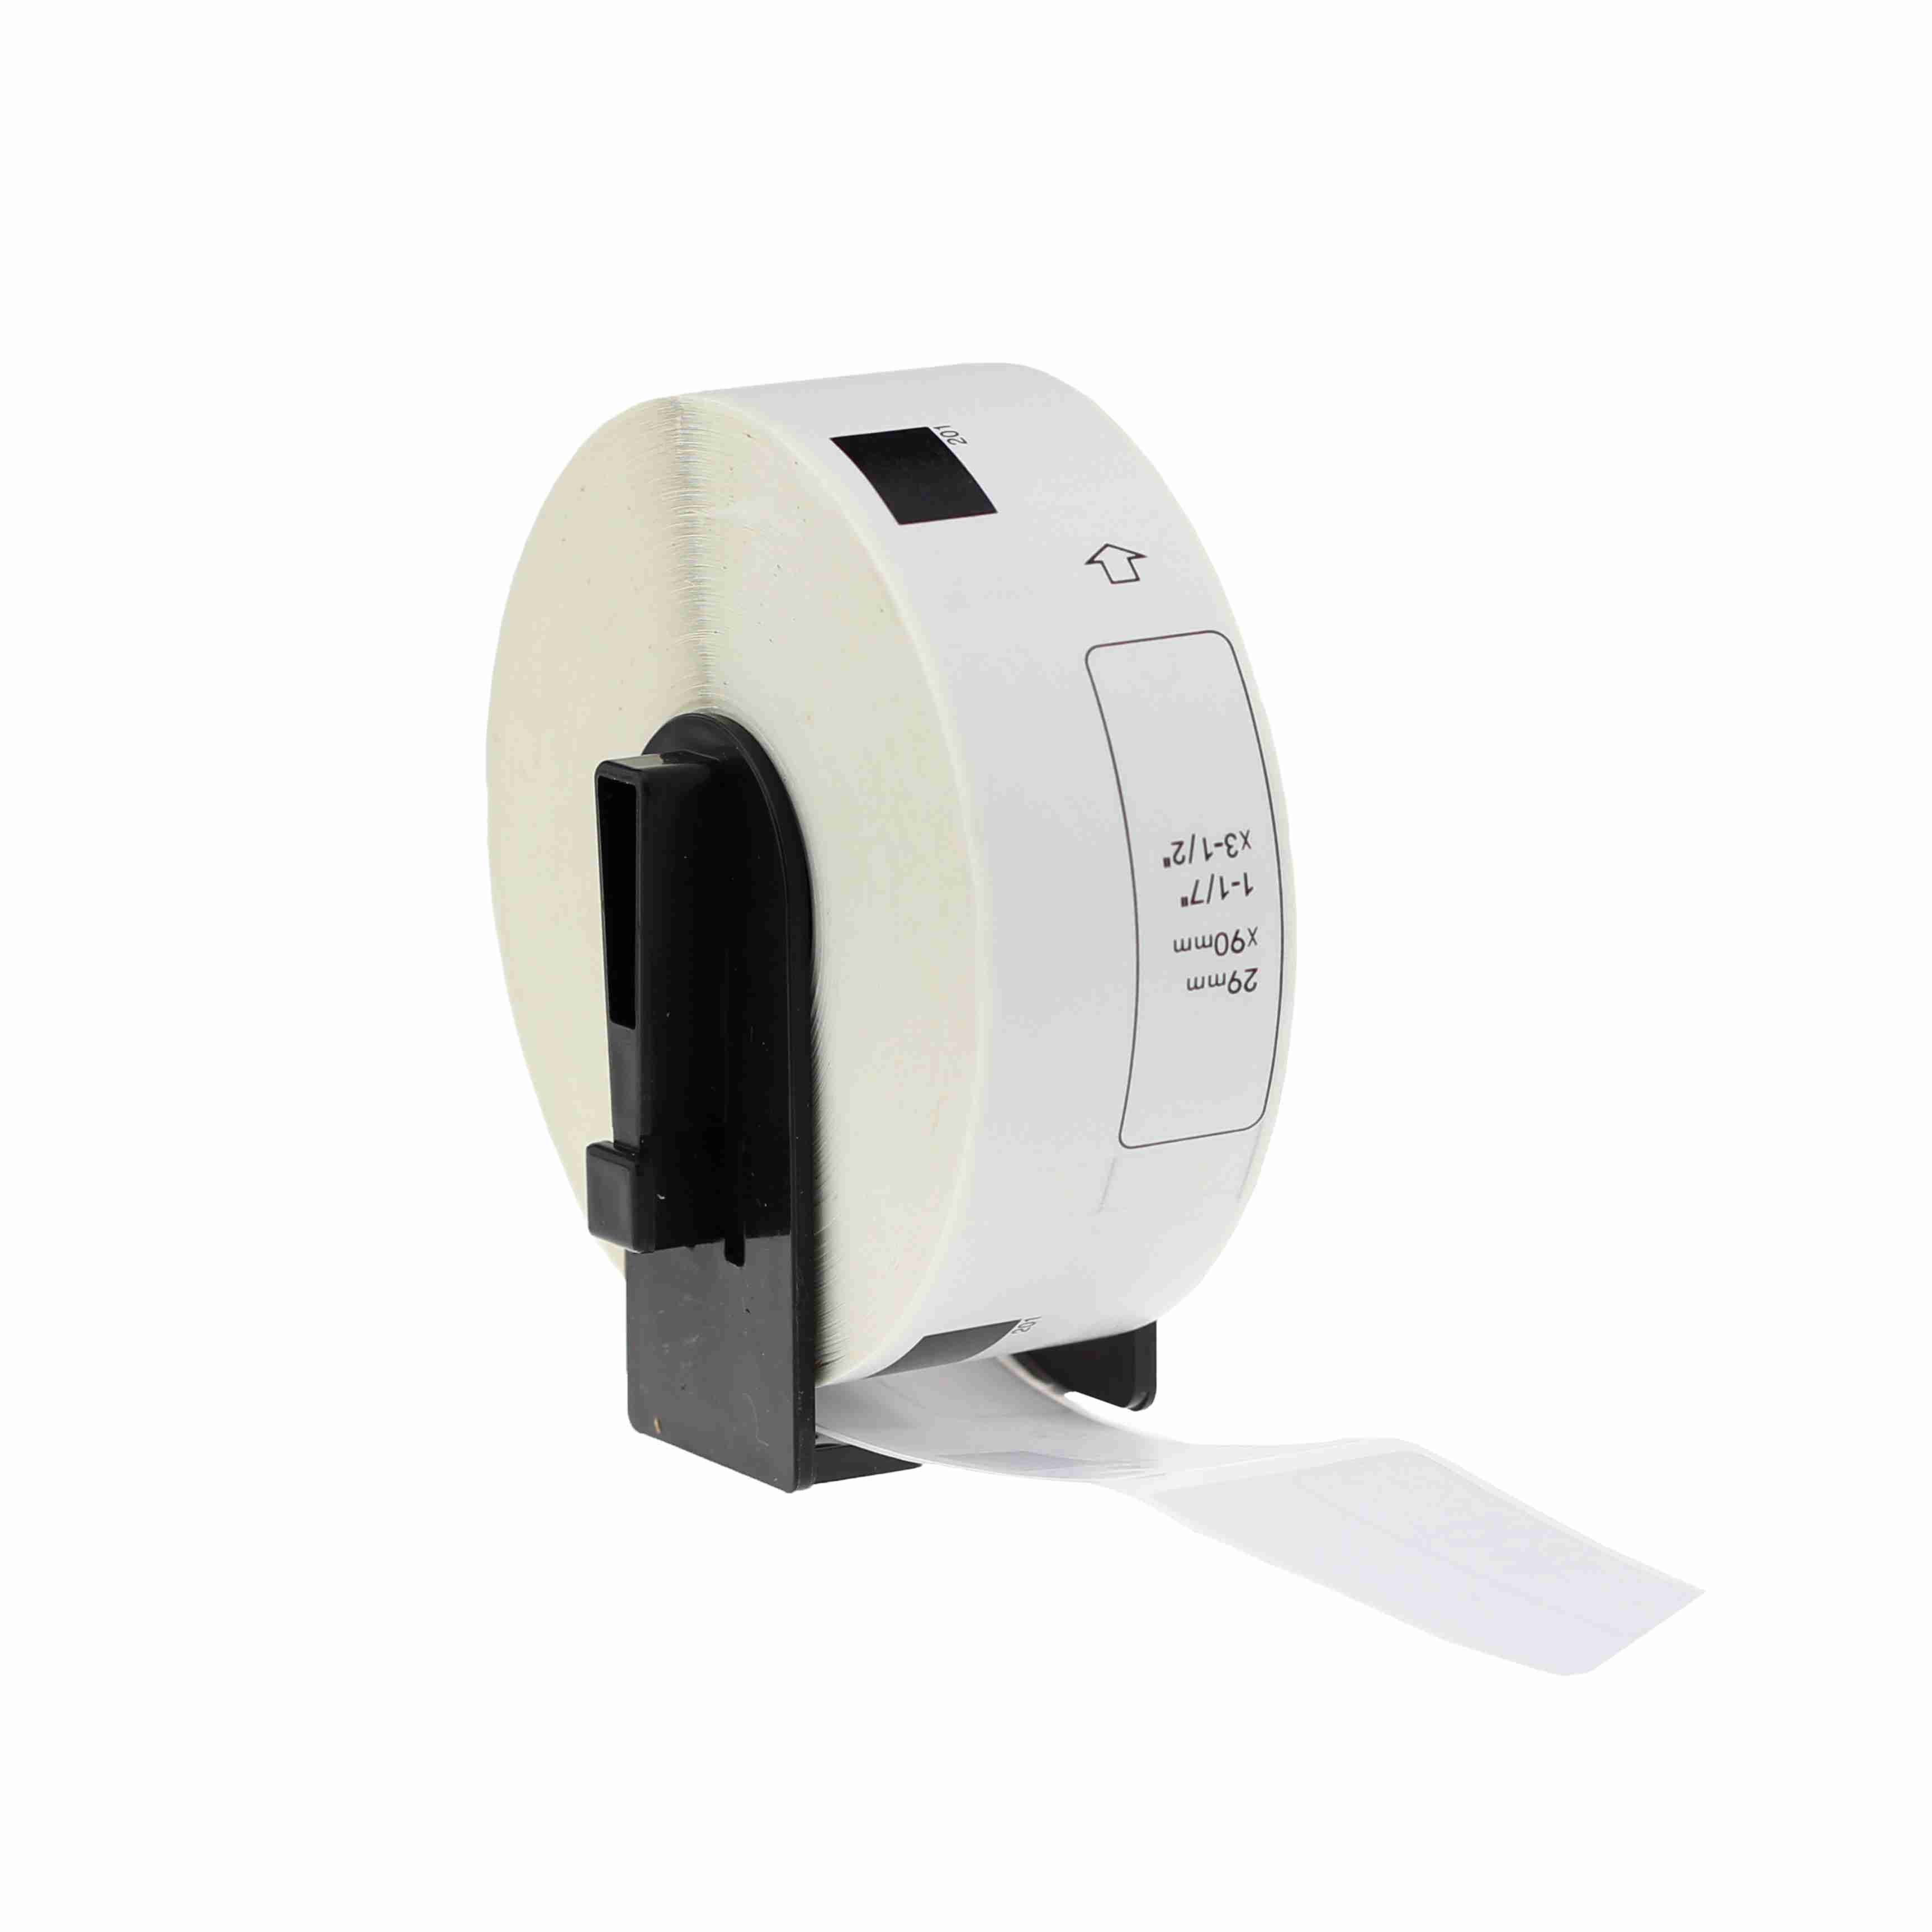 SKY DK-11201  29mm x 90mm 400 Labels per Roll Labels  for Brother QL Series Label Printers